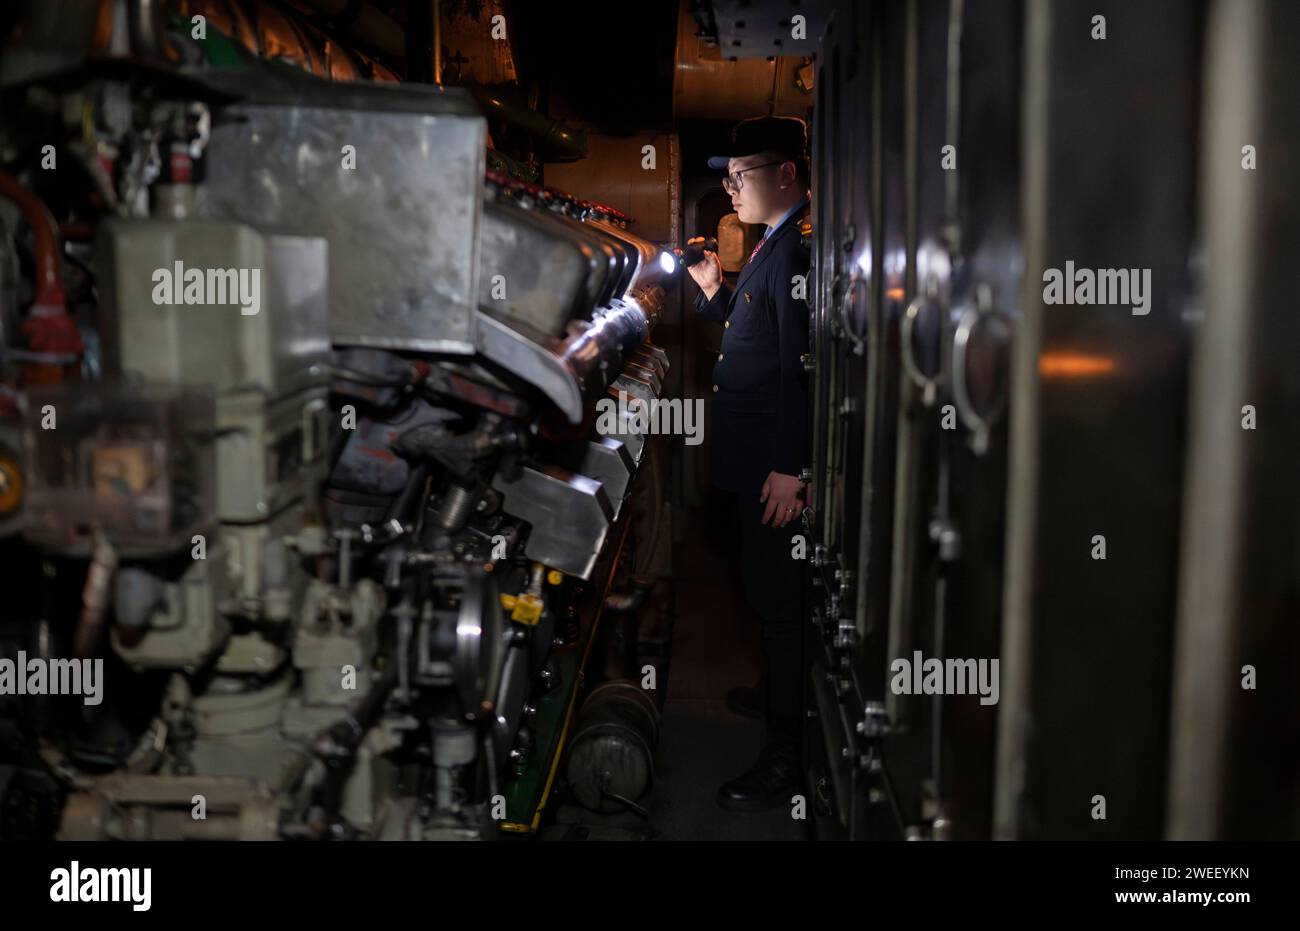 Harbin. 25th Jan, 2024. Driver Xu Ruinan works at the mechanical room of the train K7065 from Harbin to Fuyuan in northeast China's Heilongjiang Province, Jan. 23, 2024. The train K7065/K7066 travels to and fro between the city of Harbin and Fuyuan in China's northeastern province of Heilongjiang. With a single journey time of nearly 15 hours, the train replaced old carriages with new ones having air conditioning system, offering a better travel experience for locals who visit friends or commute to work or study along the line. Credit: Xinhua/Alamy Live News Stock Photo